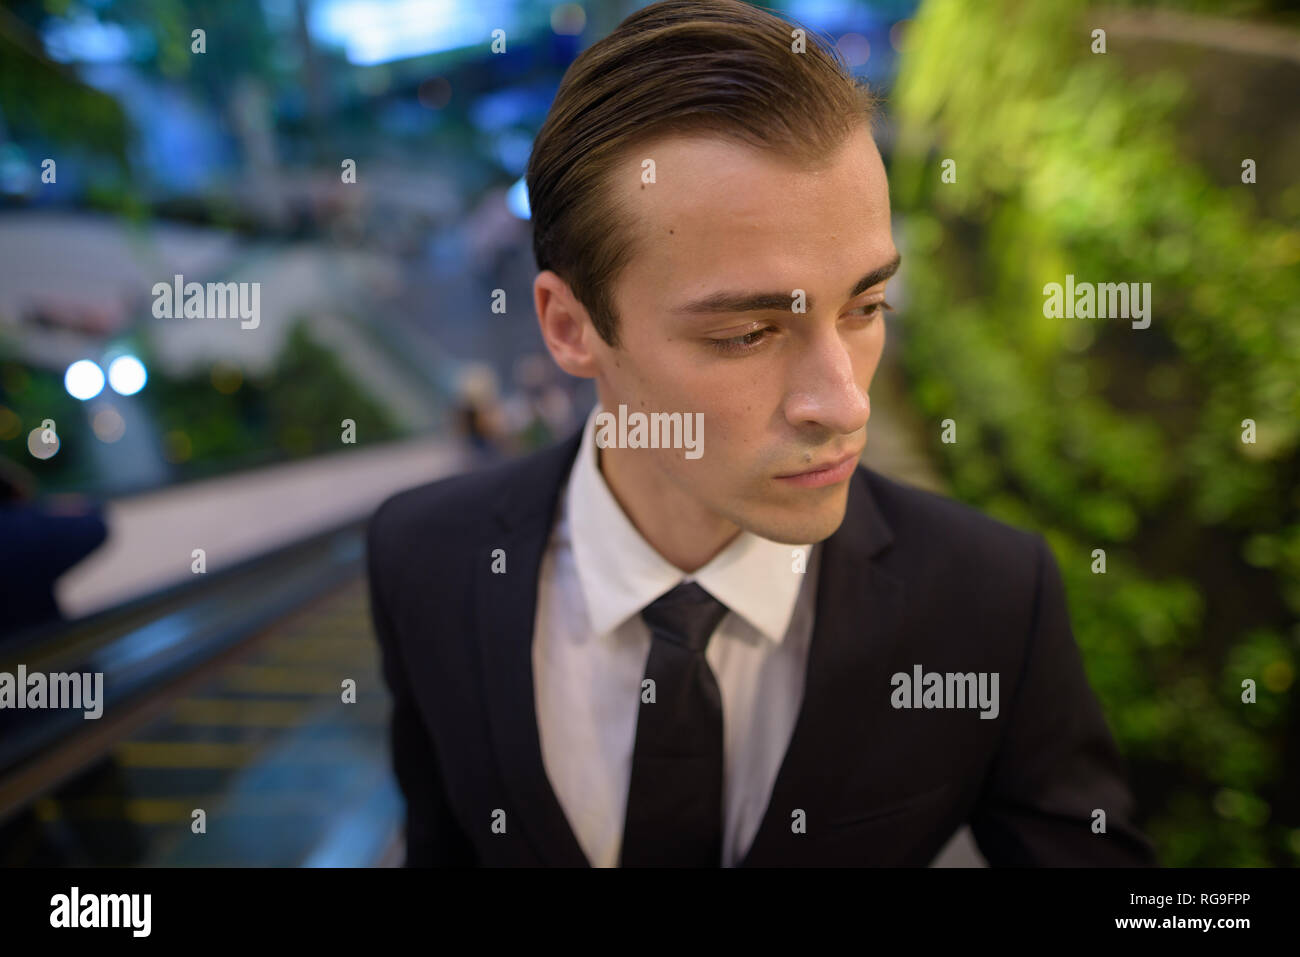 Young businessman standing at escalator while thinking Stock Photo